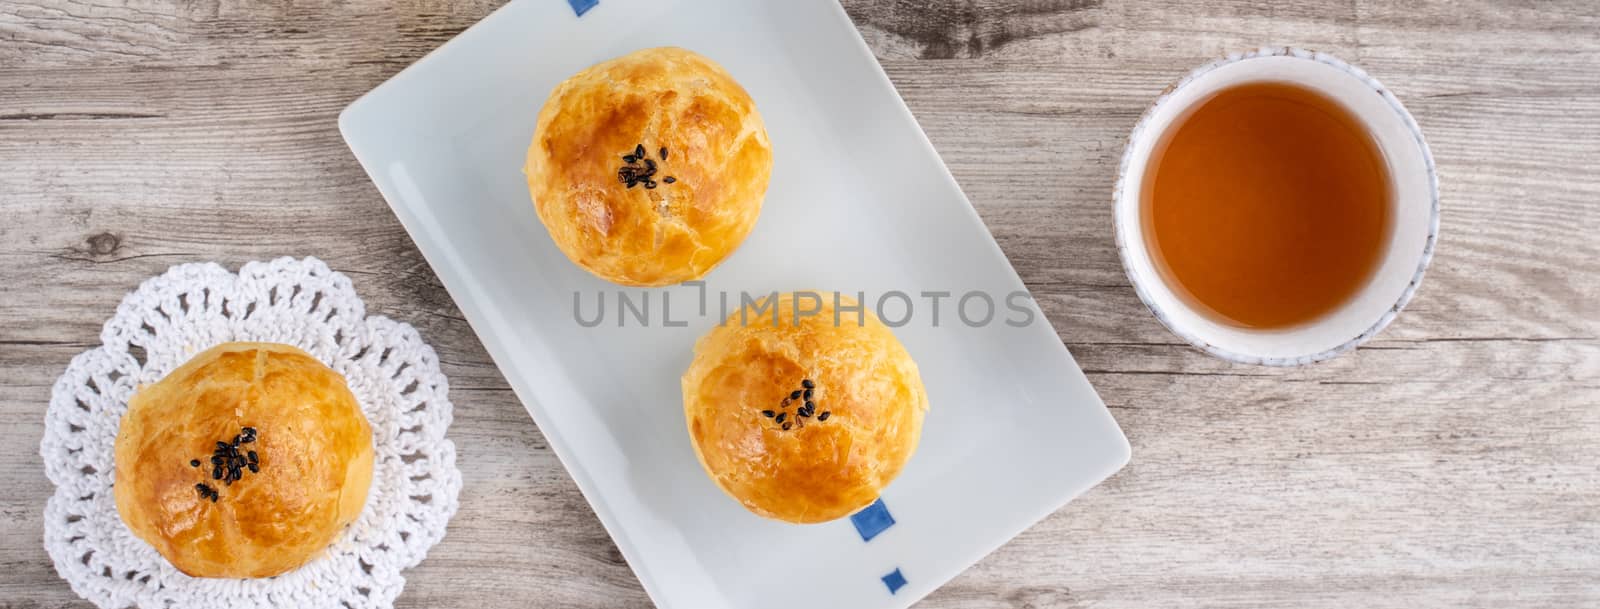 Moon cake yolk pastry, mooncake for Mid-Autumn Festival holiday, by ROMIXIMAGE